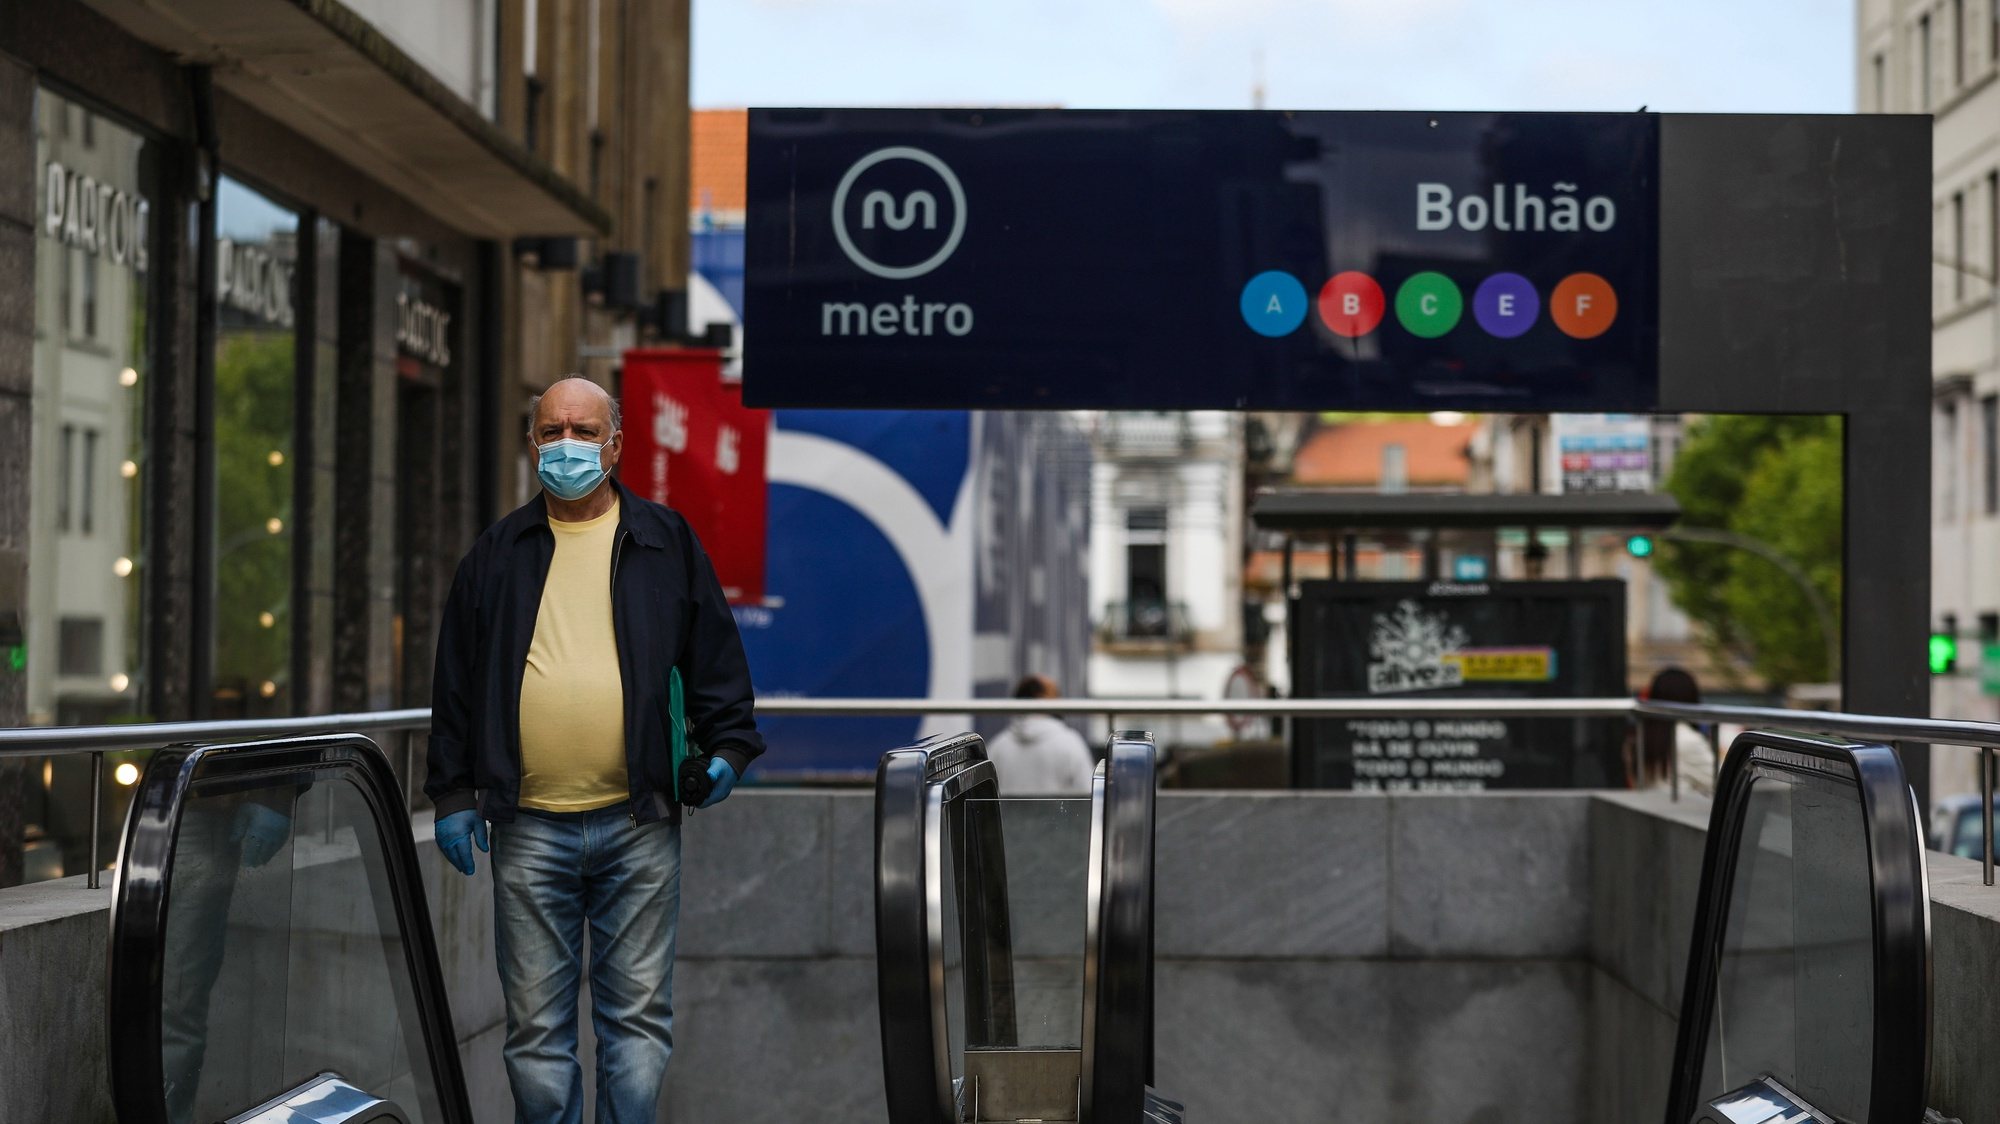 A man wears a protective mask as he exits Metro downtown Porto, northern Portugal, 11 May 2020. Local commerce, hairdressers, manicures, bookstores and automotive trade resumed activity from 04 May on, according to the Government&#039;s Discontinuation Plan released last week, in which we went from a state of emergency to a state of public calamity.JOSE COELHO/LUSA